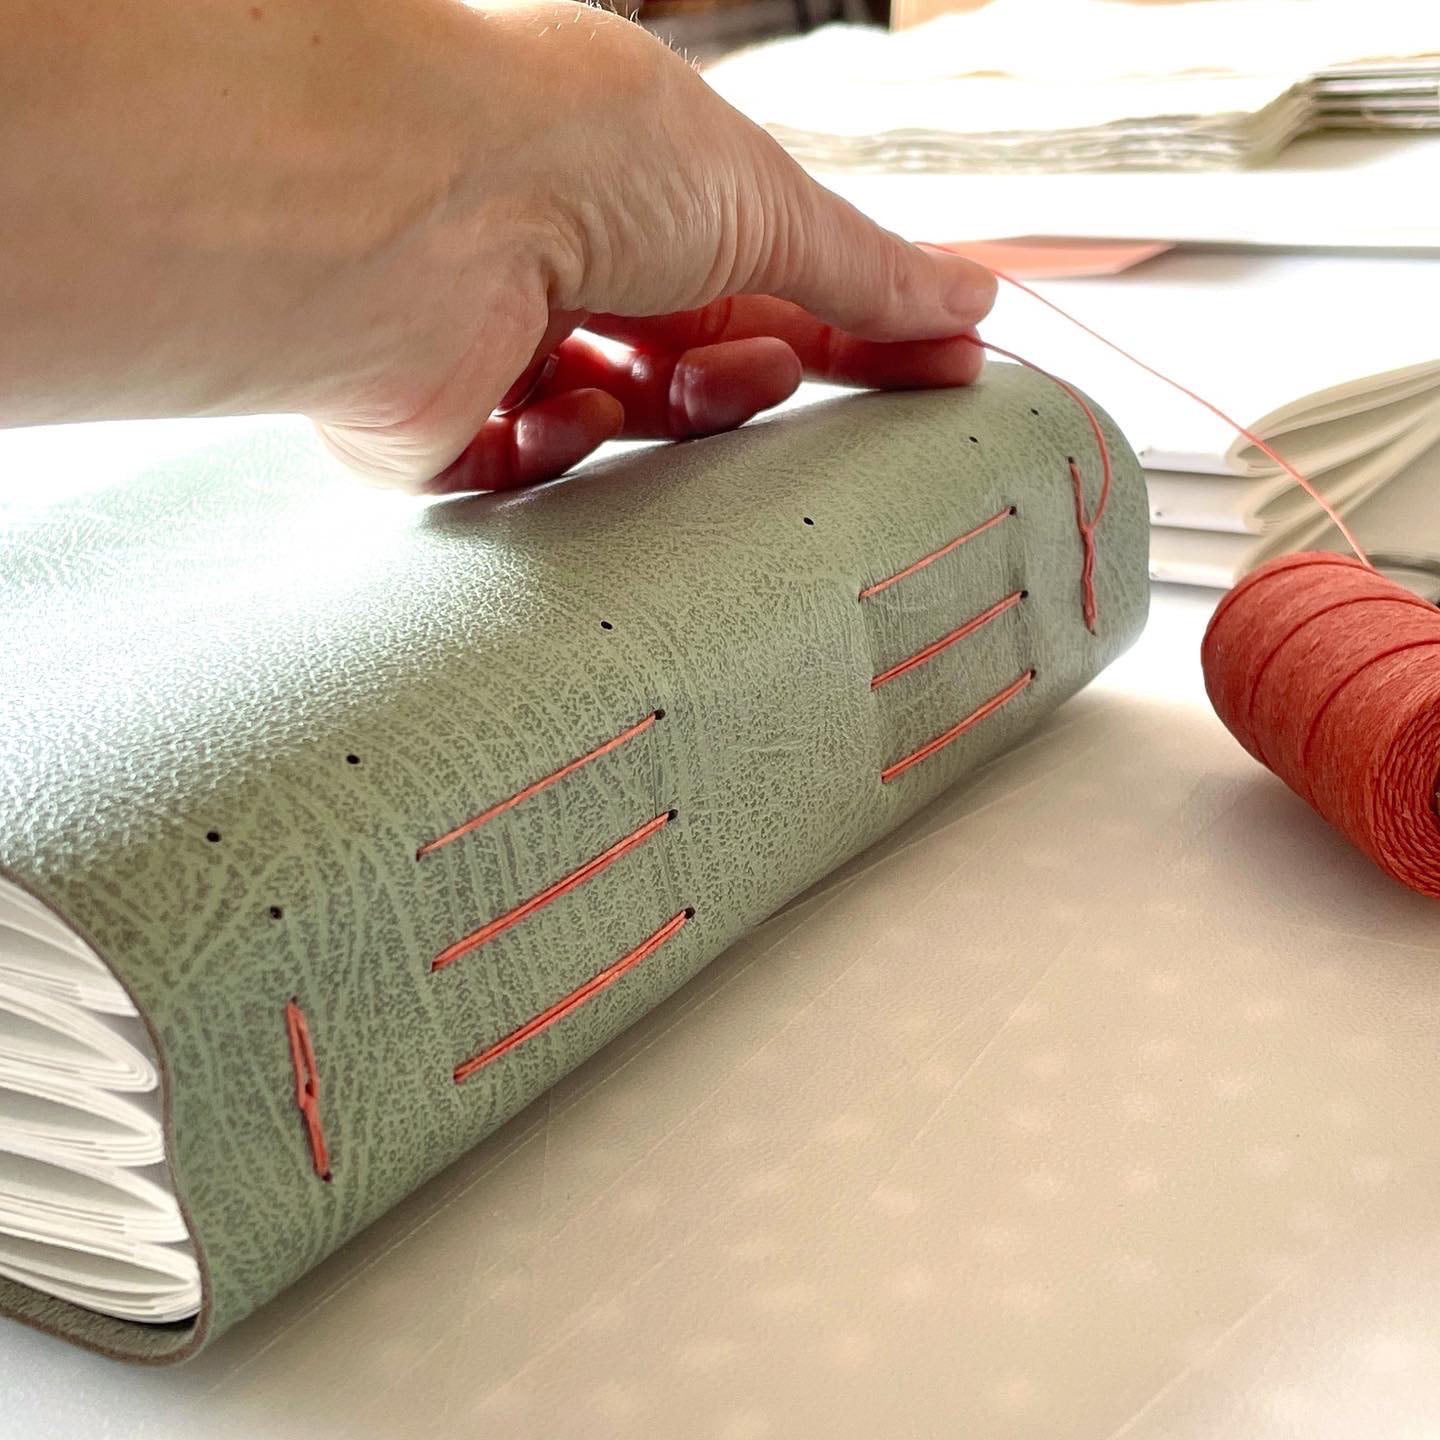 Pages are sewn through the leather to make a softcover, flexible book that's extremely durable so it will last through the generations.